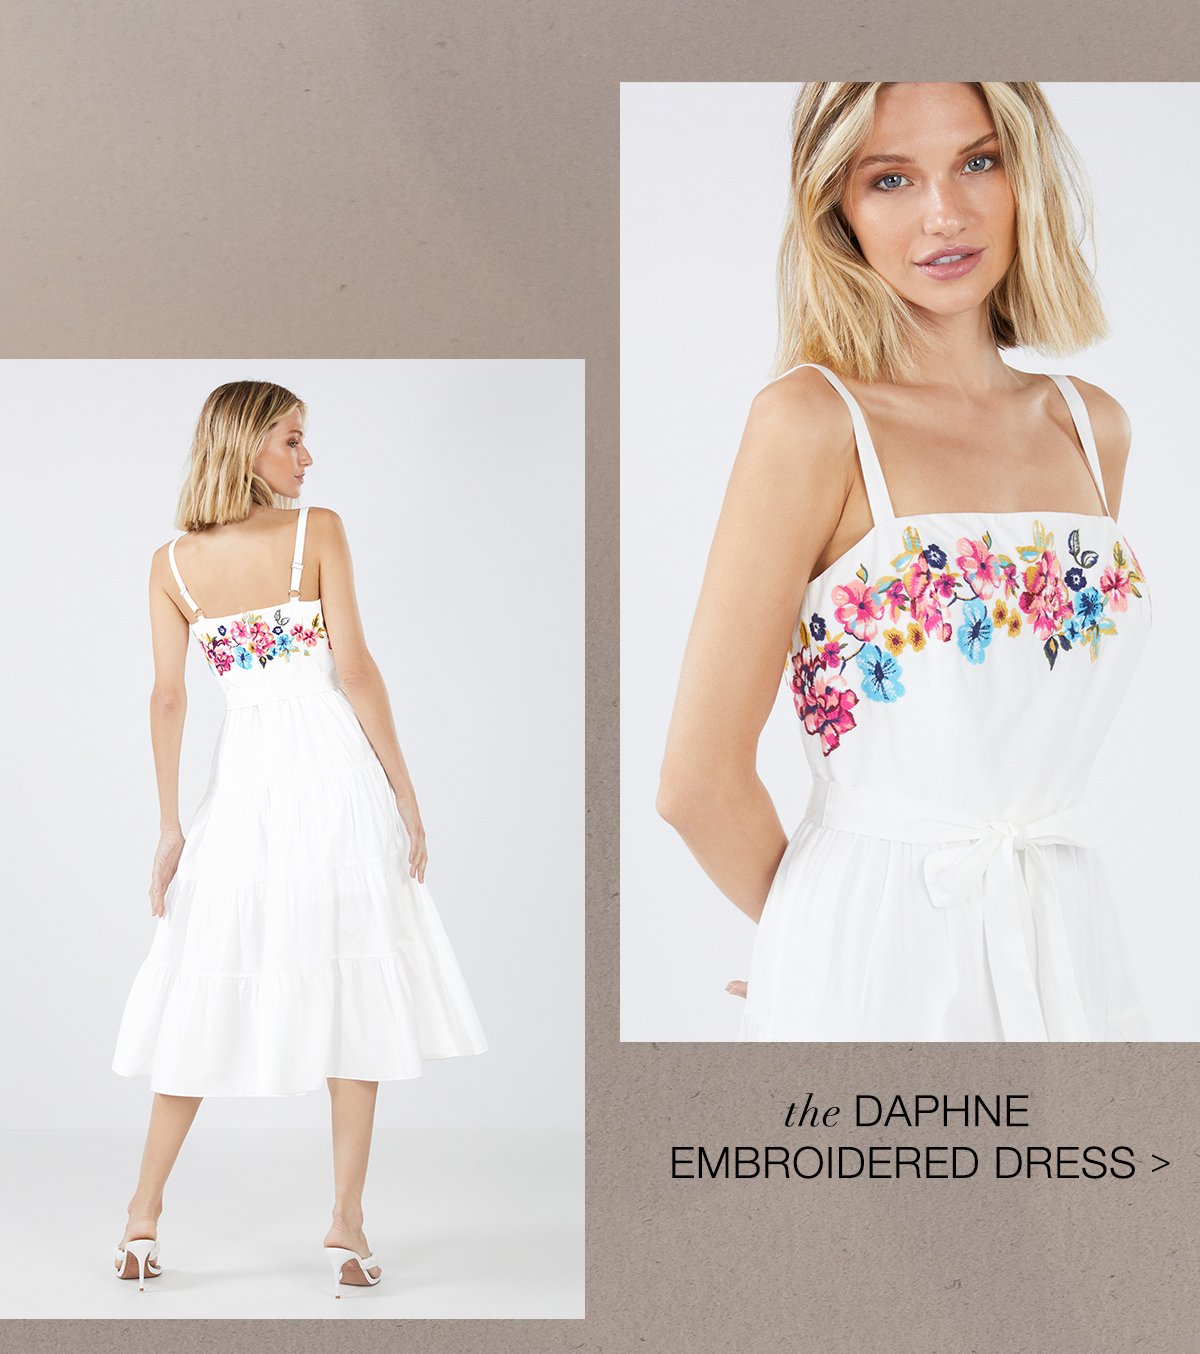 the Daphne Embroidered Dress